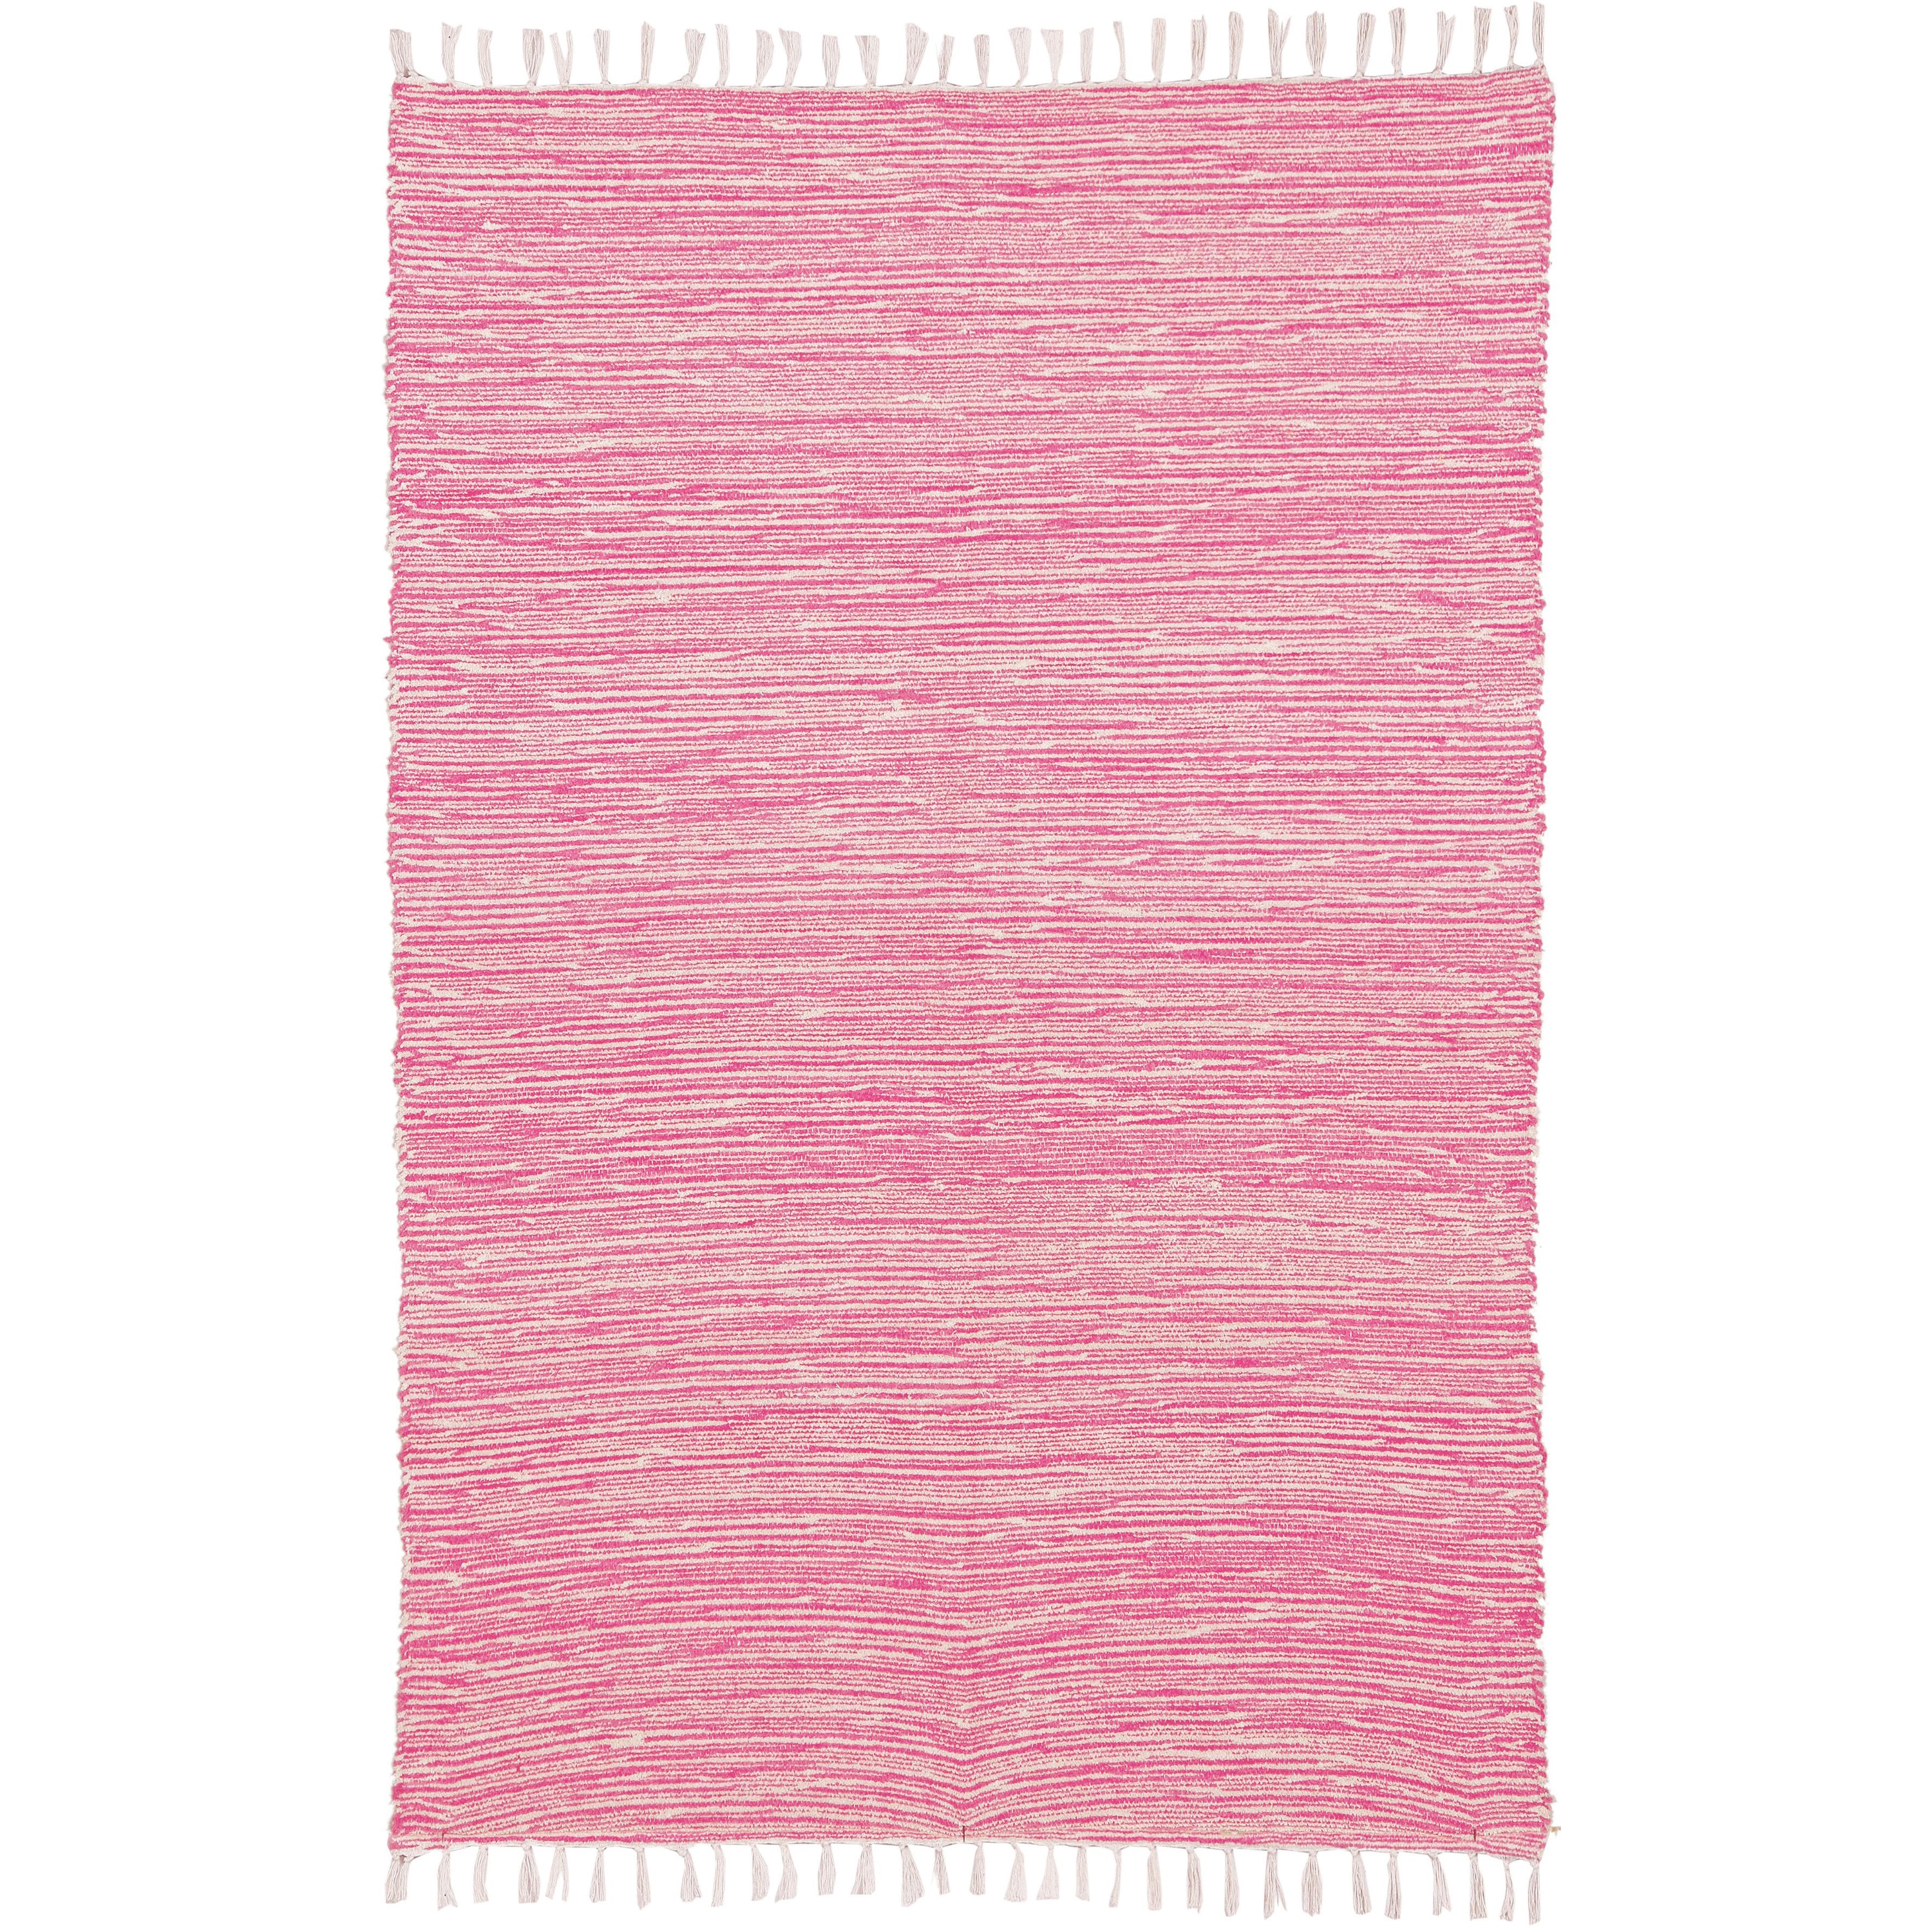 Pink Reversible Chenille Flat Weave Area Rug (3 X 5)